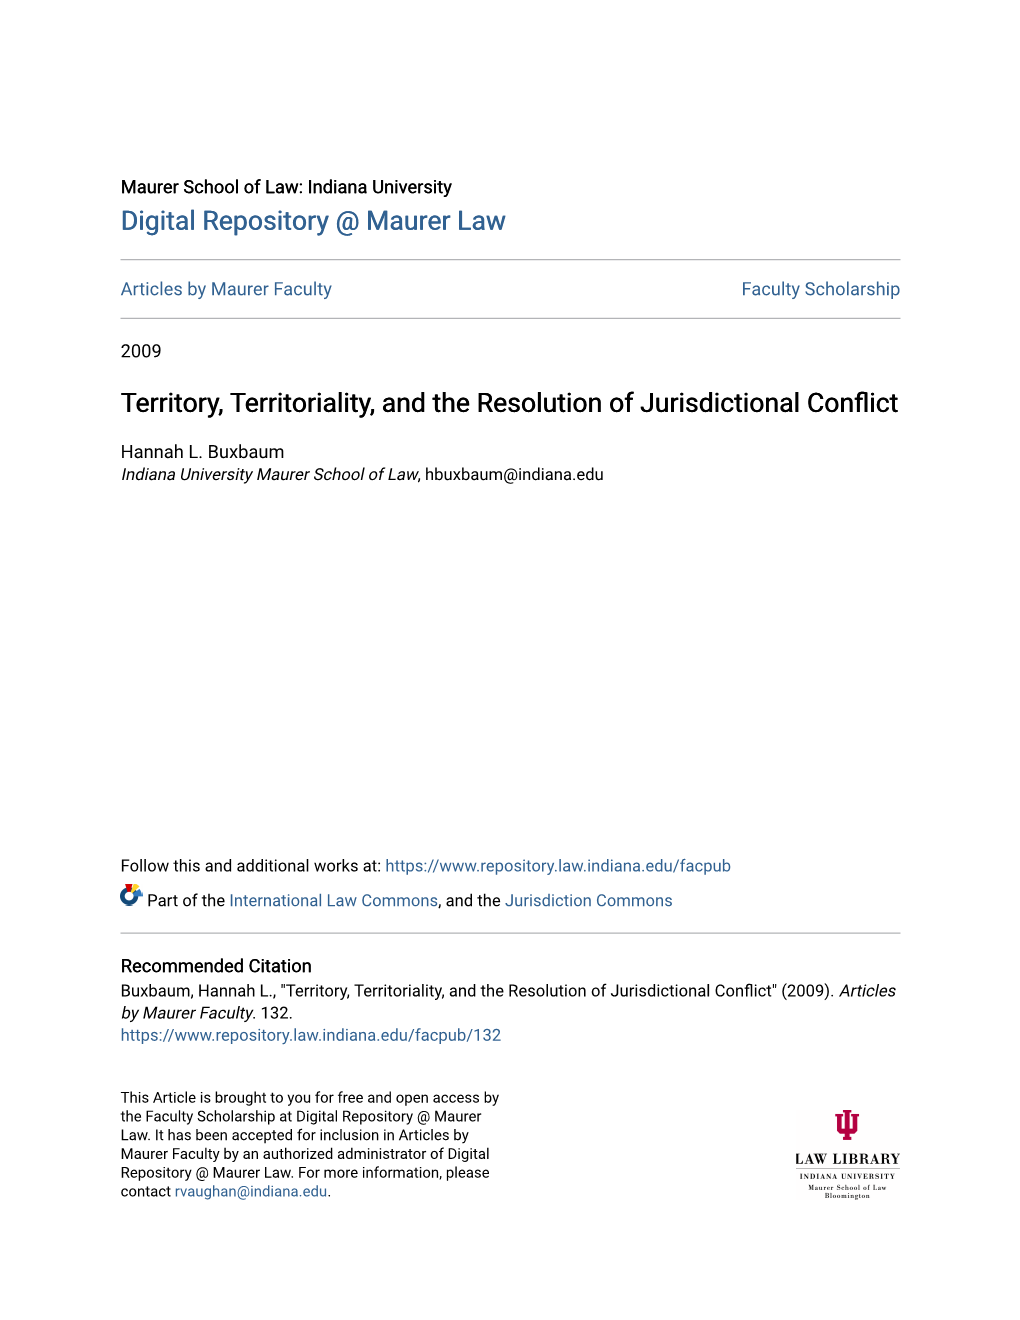 Territory, Territoriality, and the Resolution of Jurisdictional Conflict